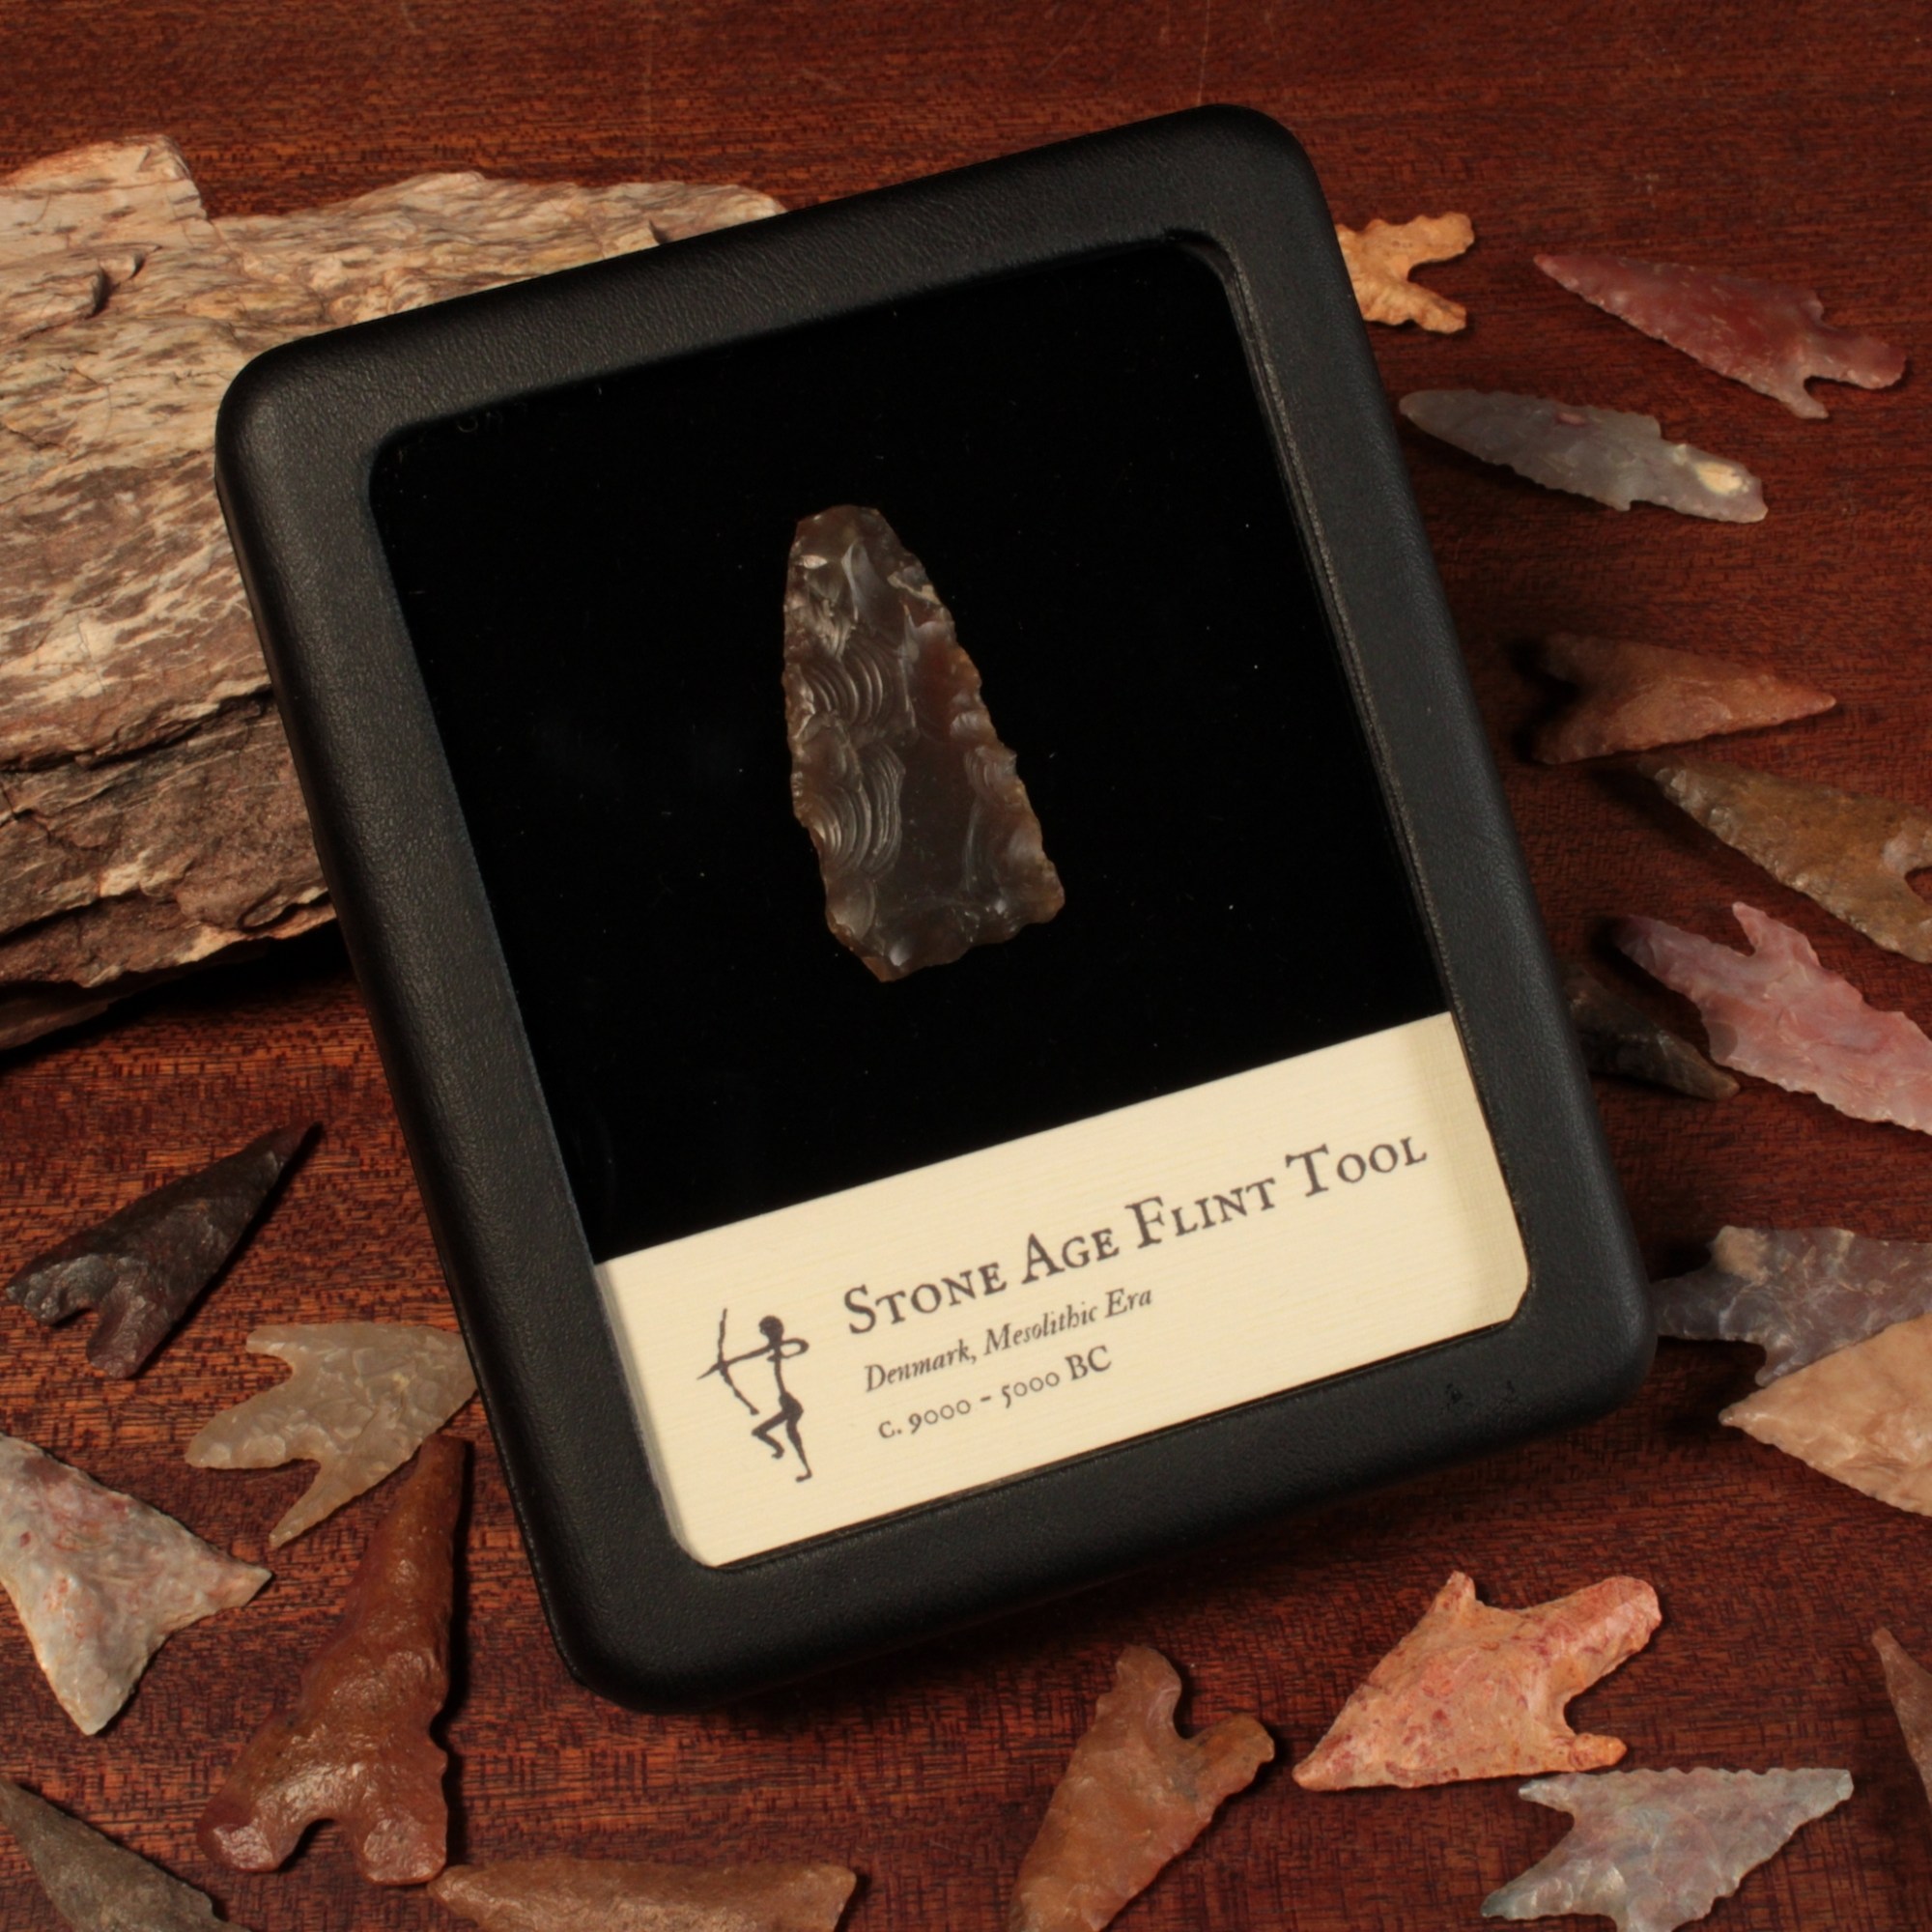 Danish Mesolithic Stone Tool, 1.5 inches - c. 9000 to 5000 BCE - Denmark - 1/17/23 Auction